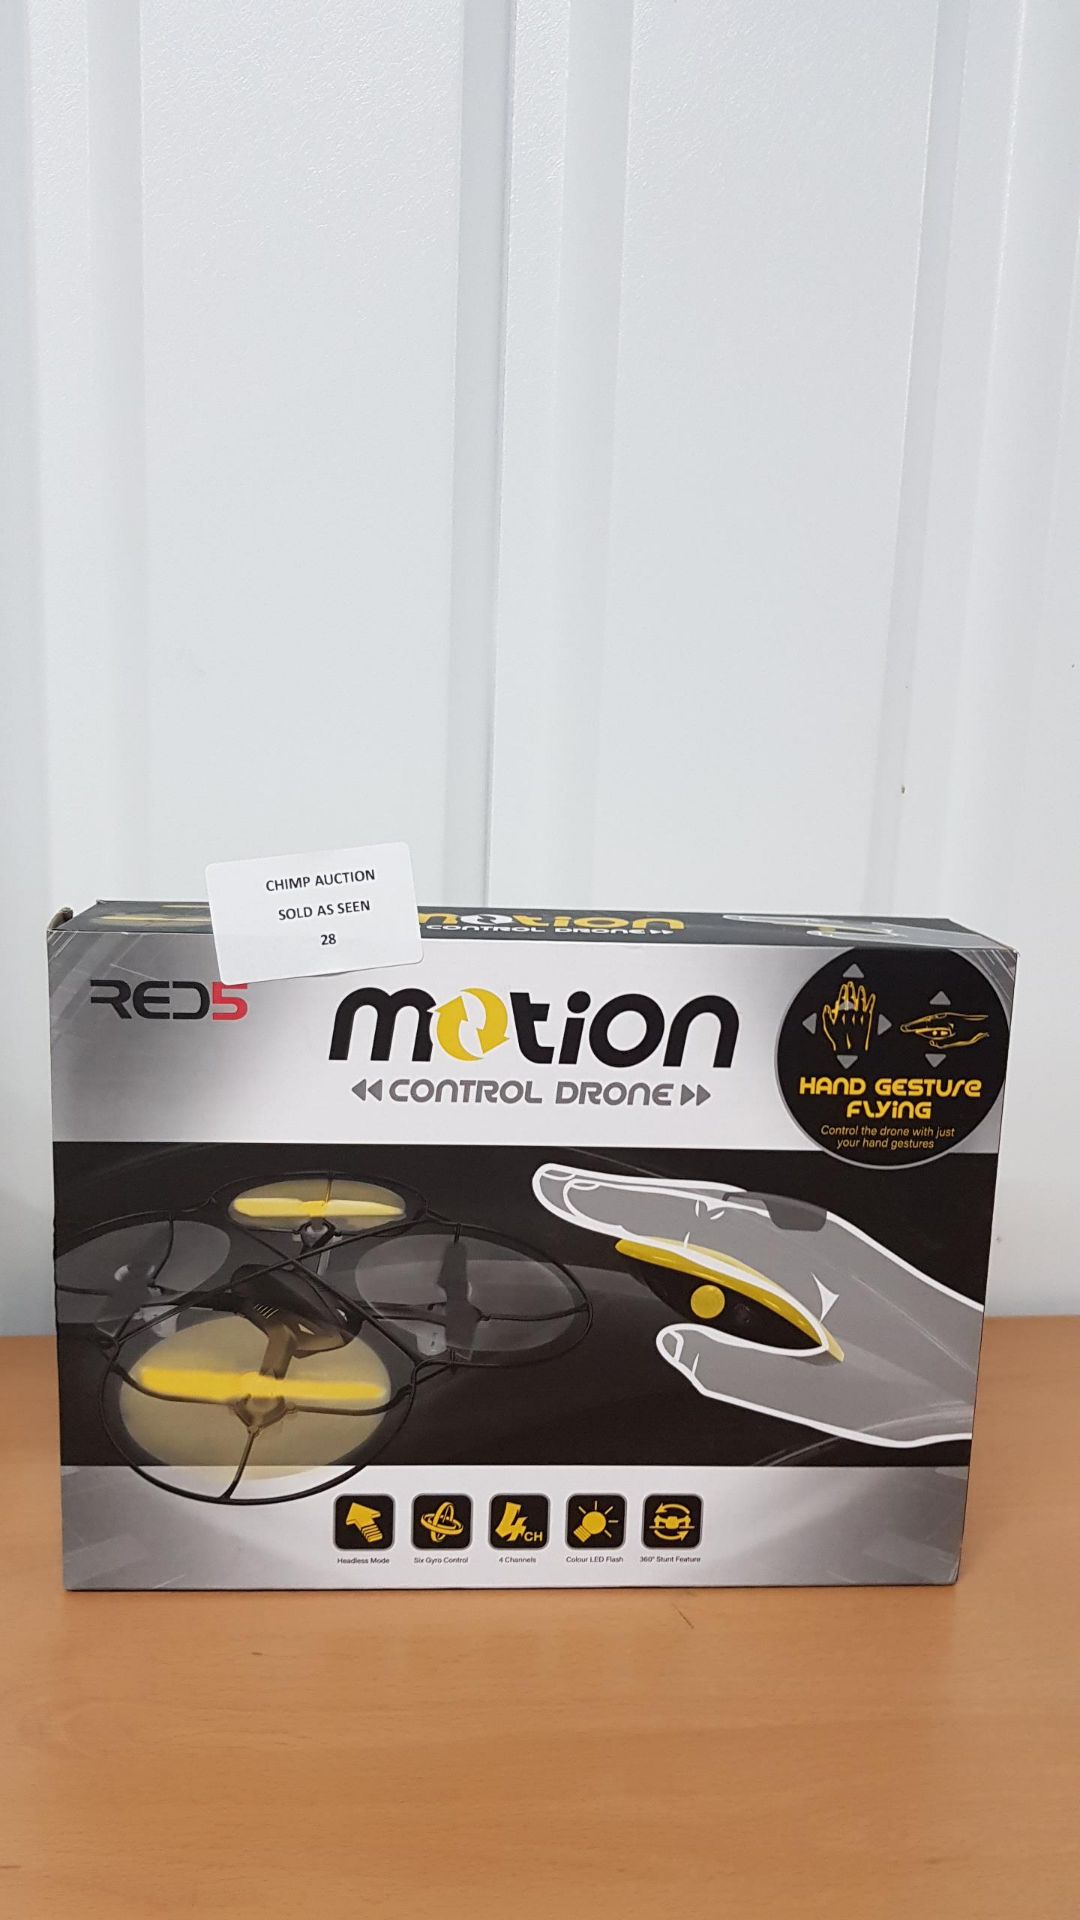 Red5 motion controlled drone